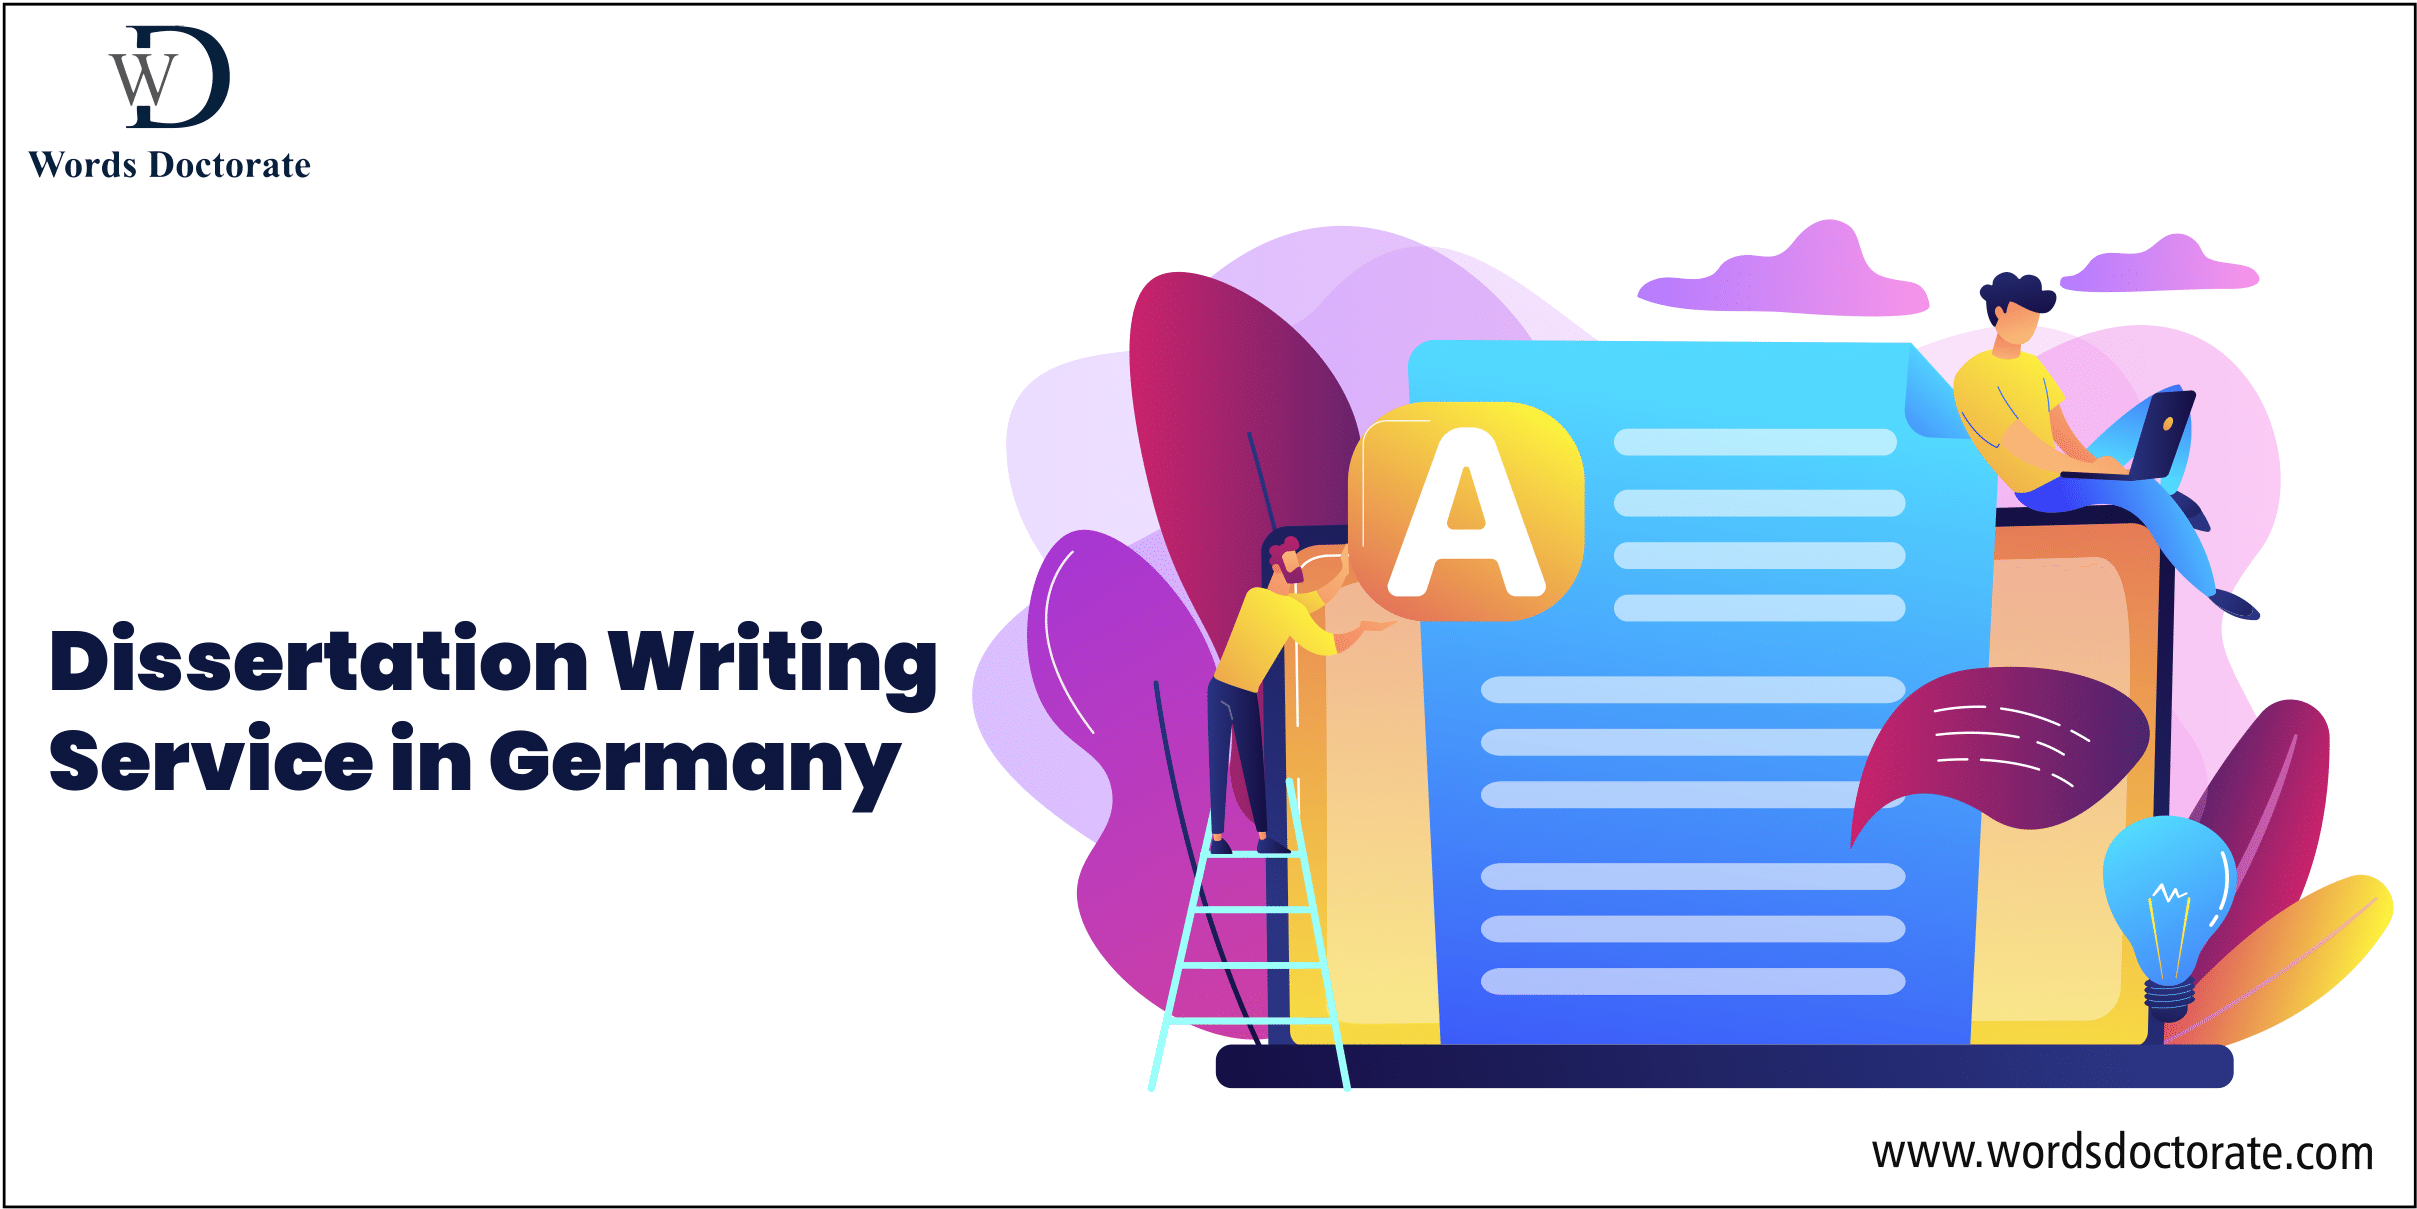 Dissertation Writing Service in Germany